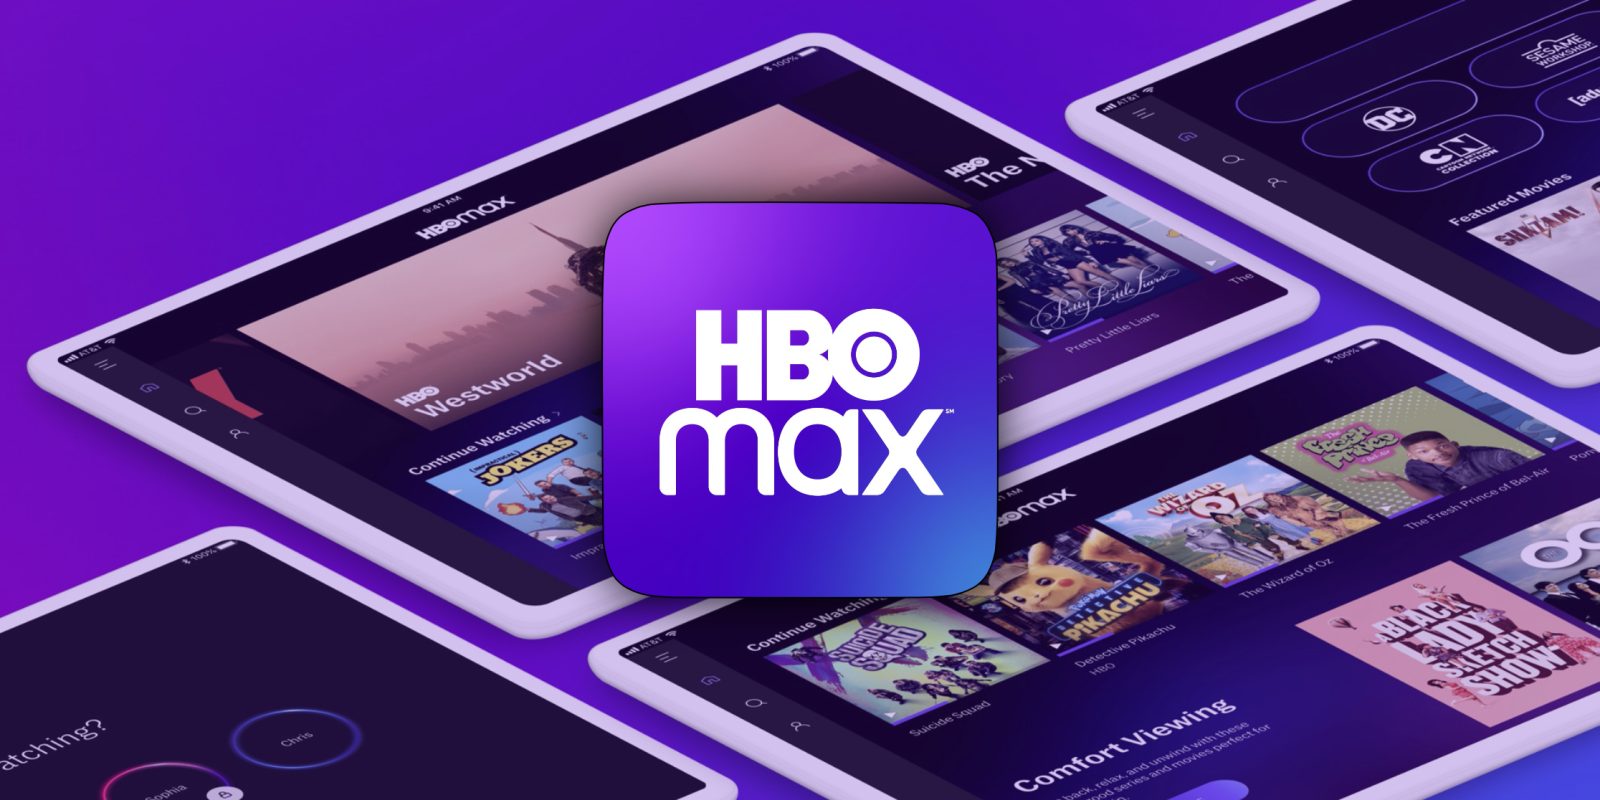 undertøj Grundlæggende teori Strømcelle HBO officially shuts down its Apple TV Channel, cutting off HBO Max access  for some users [U: Promo from Apple] - 9to5Mac